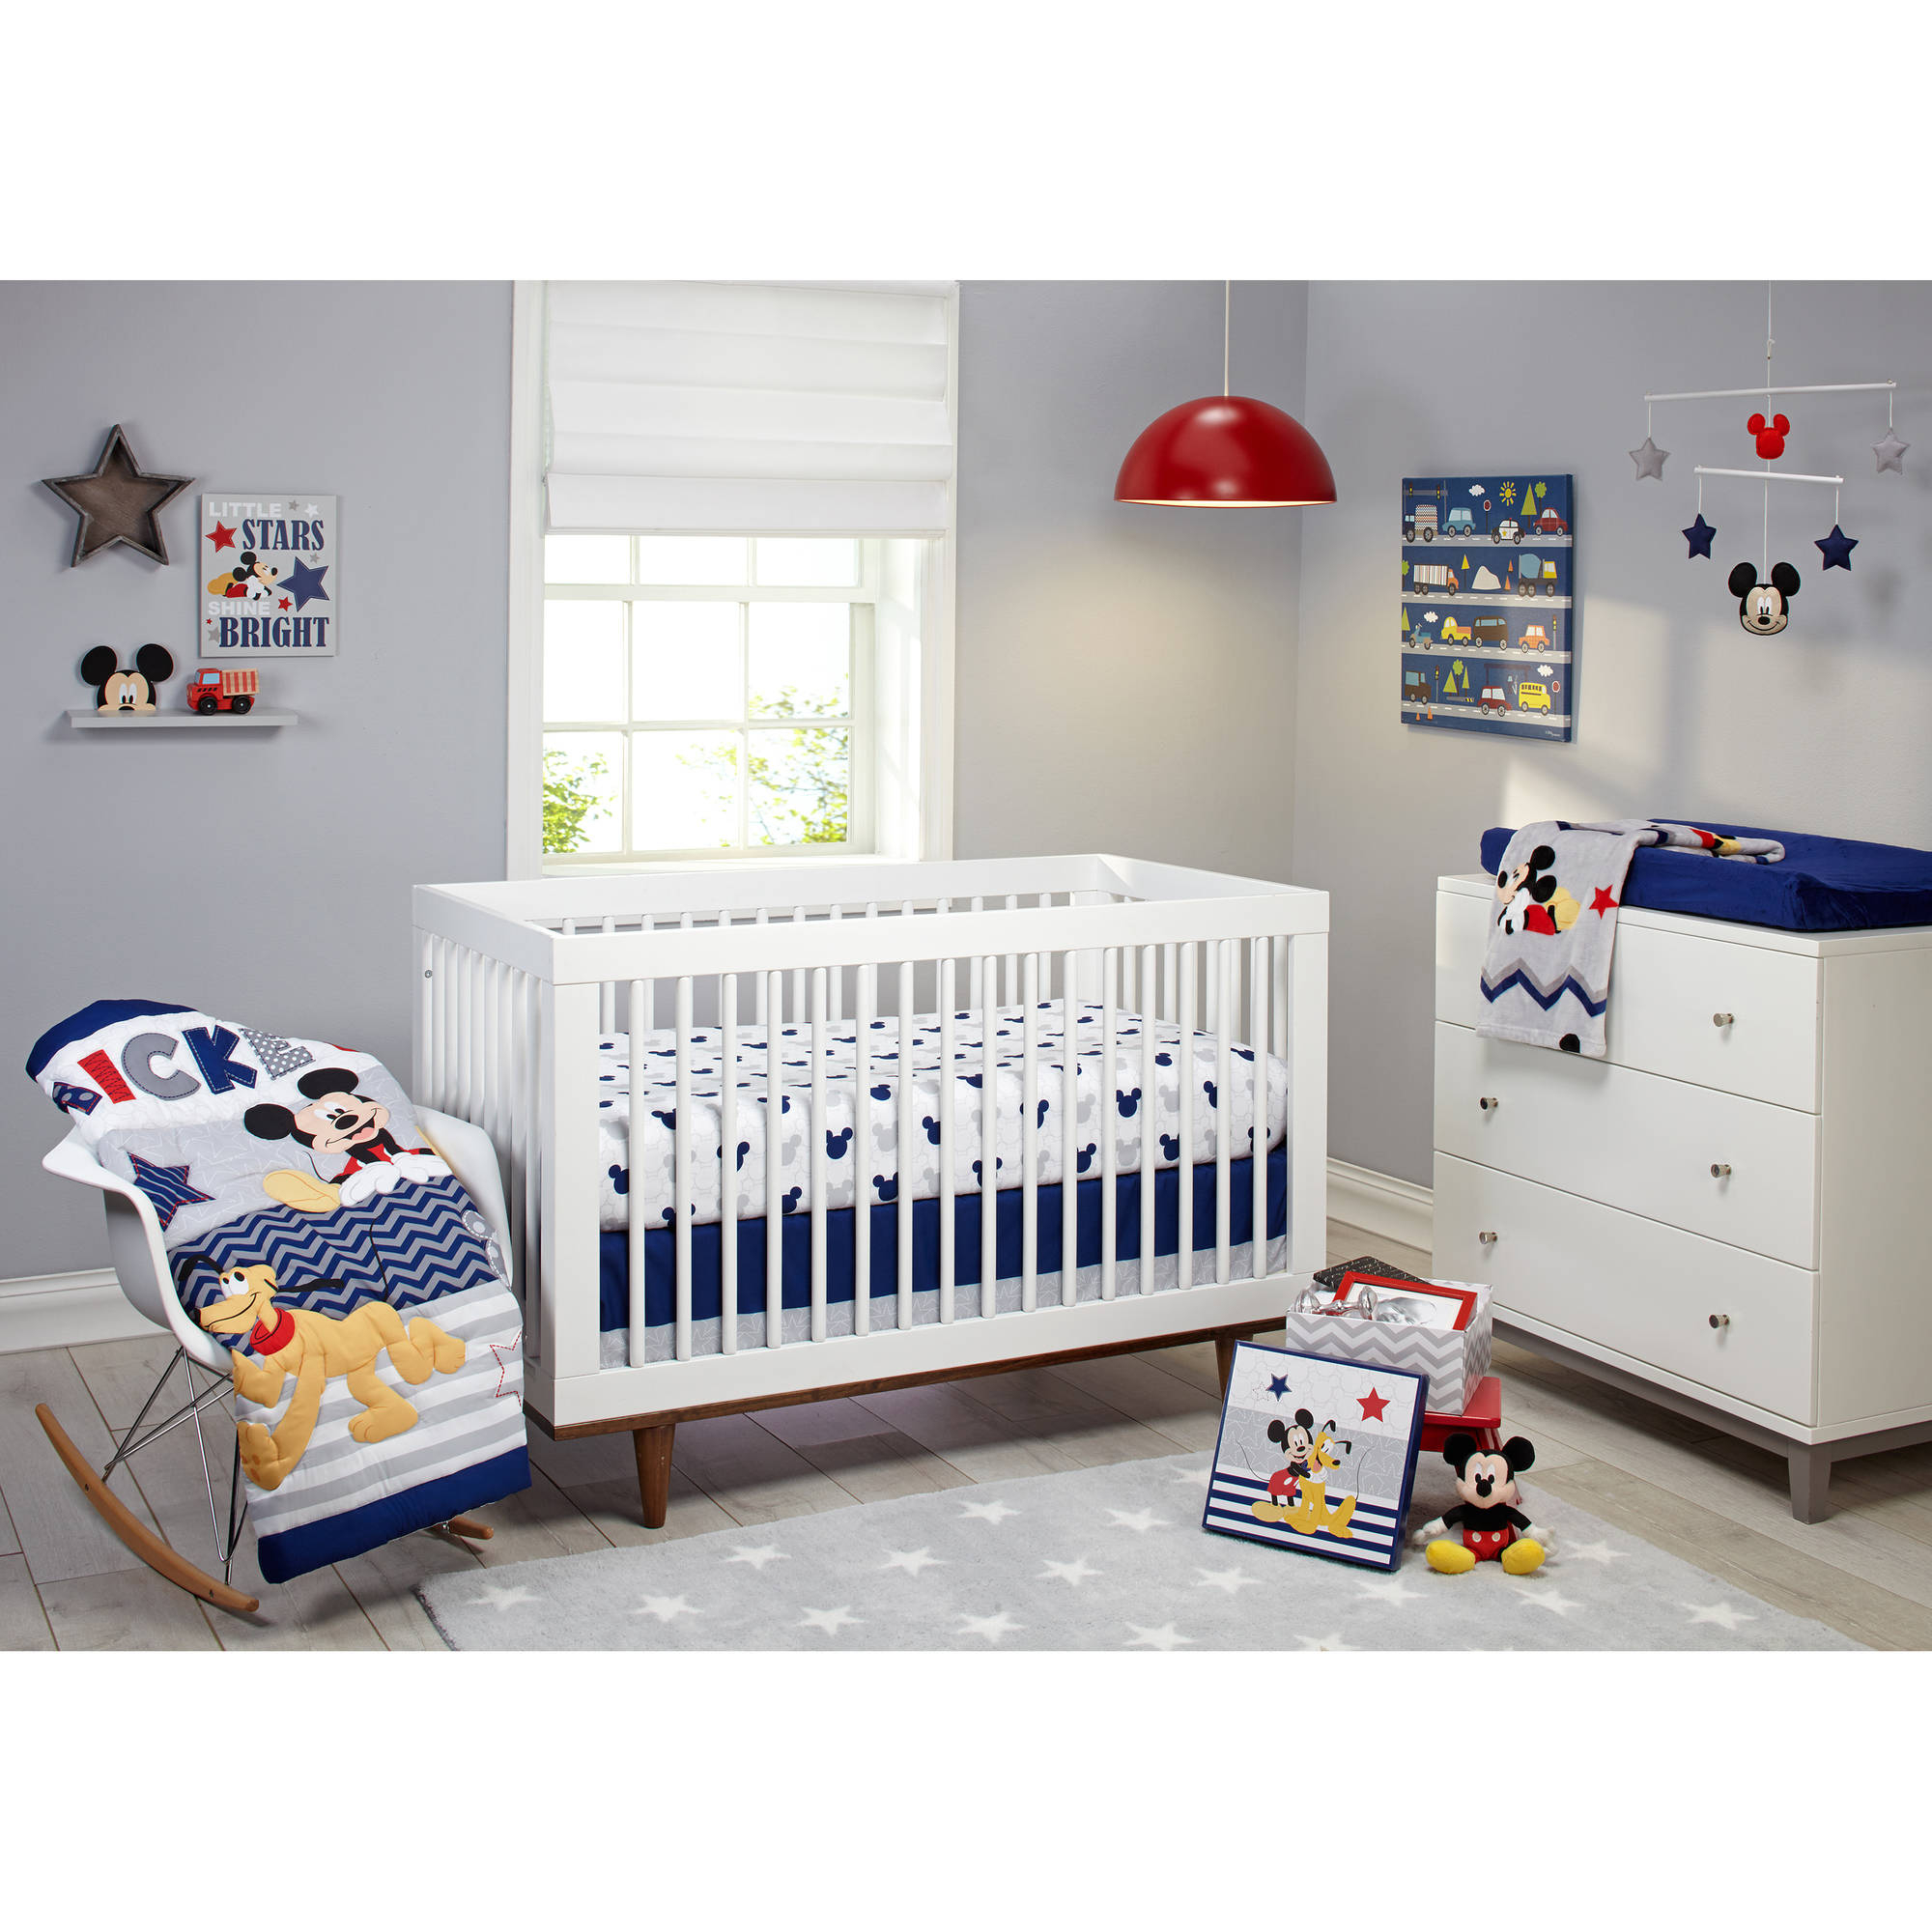 Disney Lets Go Mickey Ii 4 Piece Crib Bedding Set within proportions 2000 X 2000